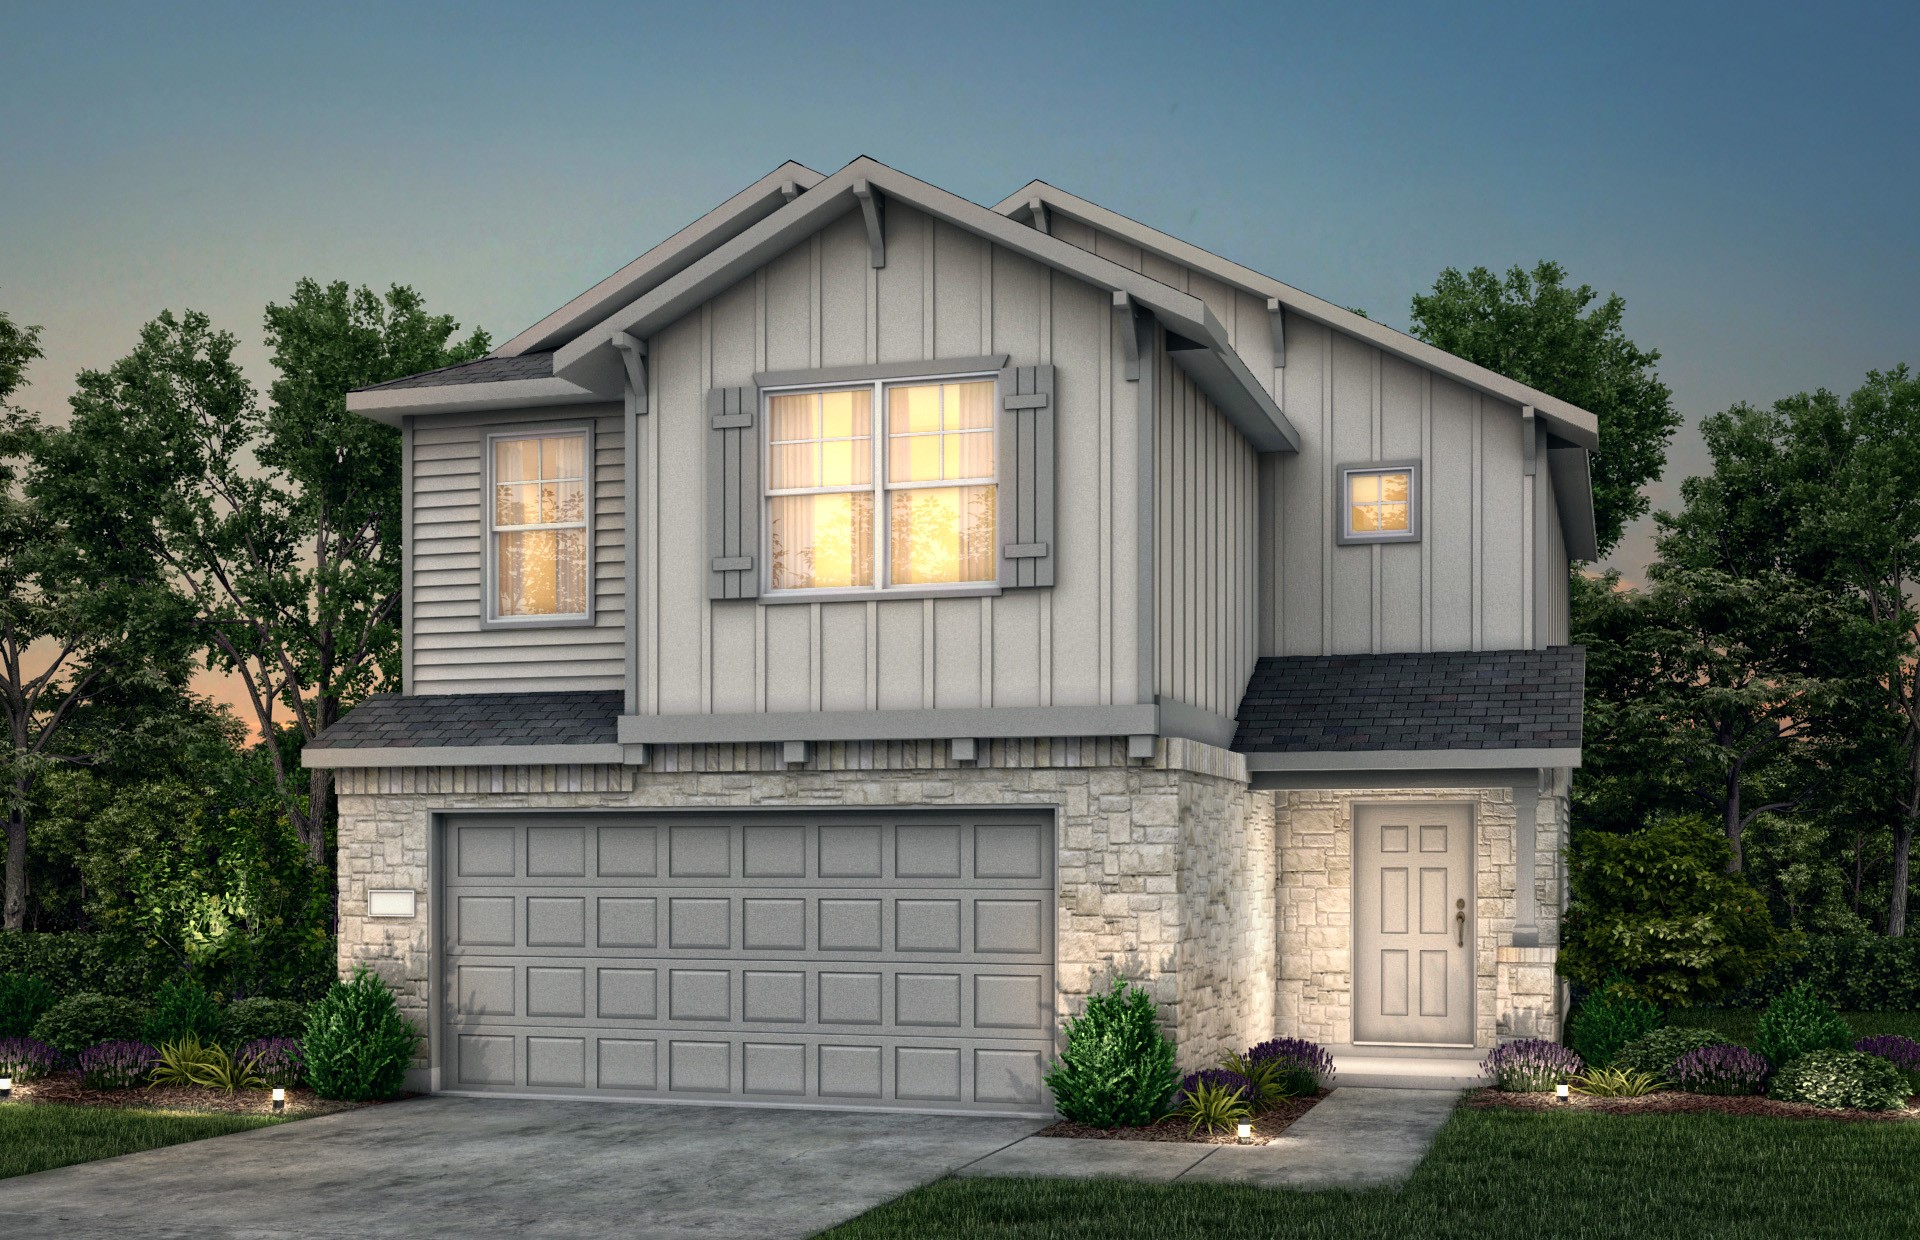 Rendering is representative of the exterior of the home upon completion.
